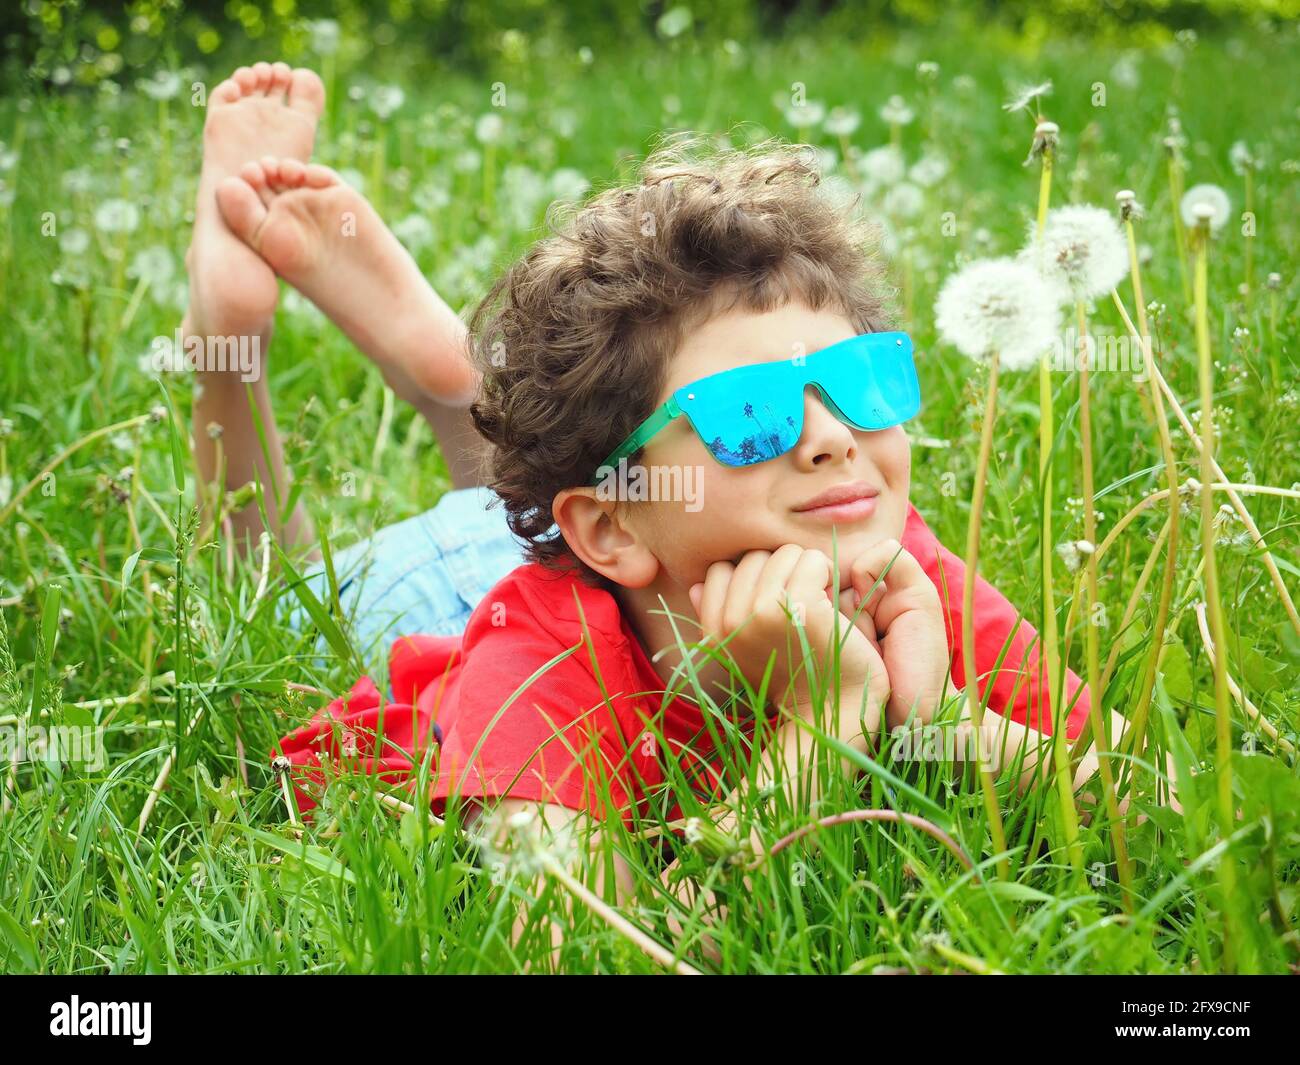 Cute little boy in blue sunglasses lying on the grass with dandelions Stock Photo